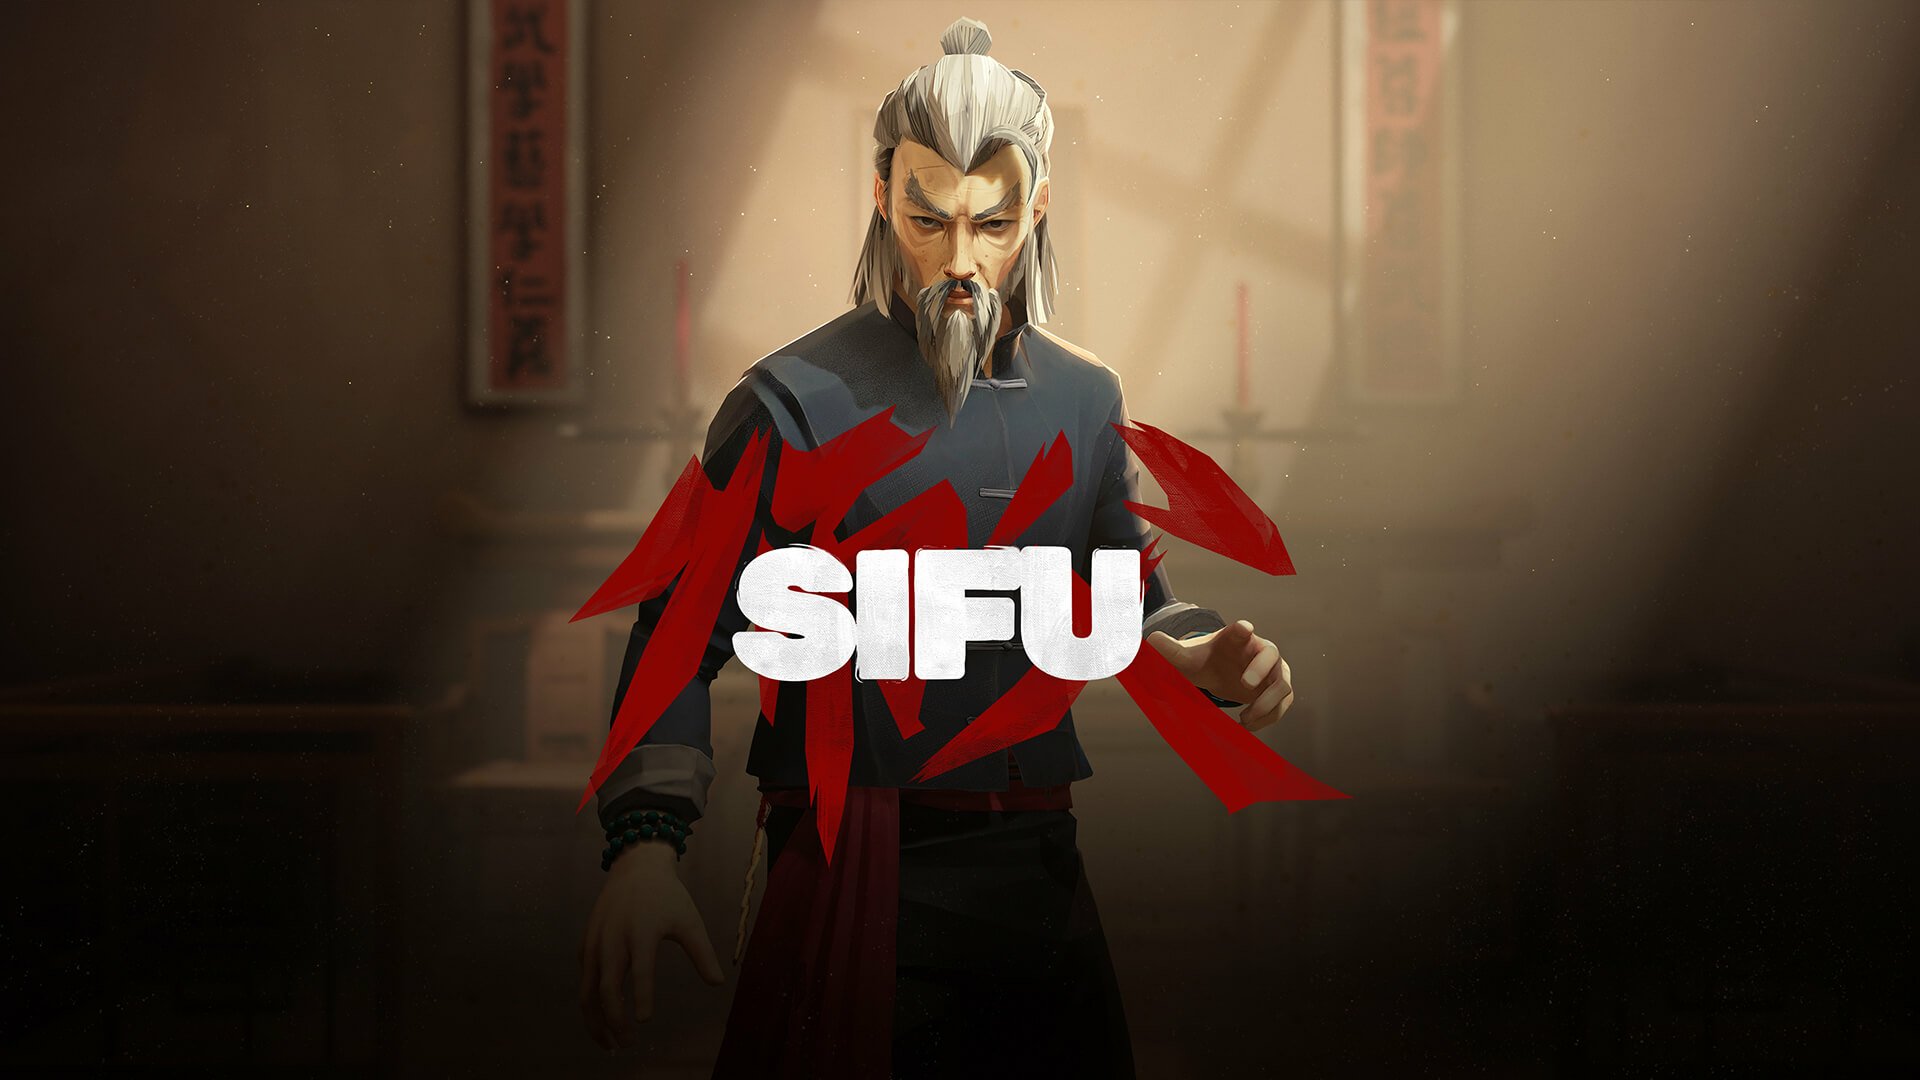 Martial arts game Sifu got its release date for February with its new trailer.